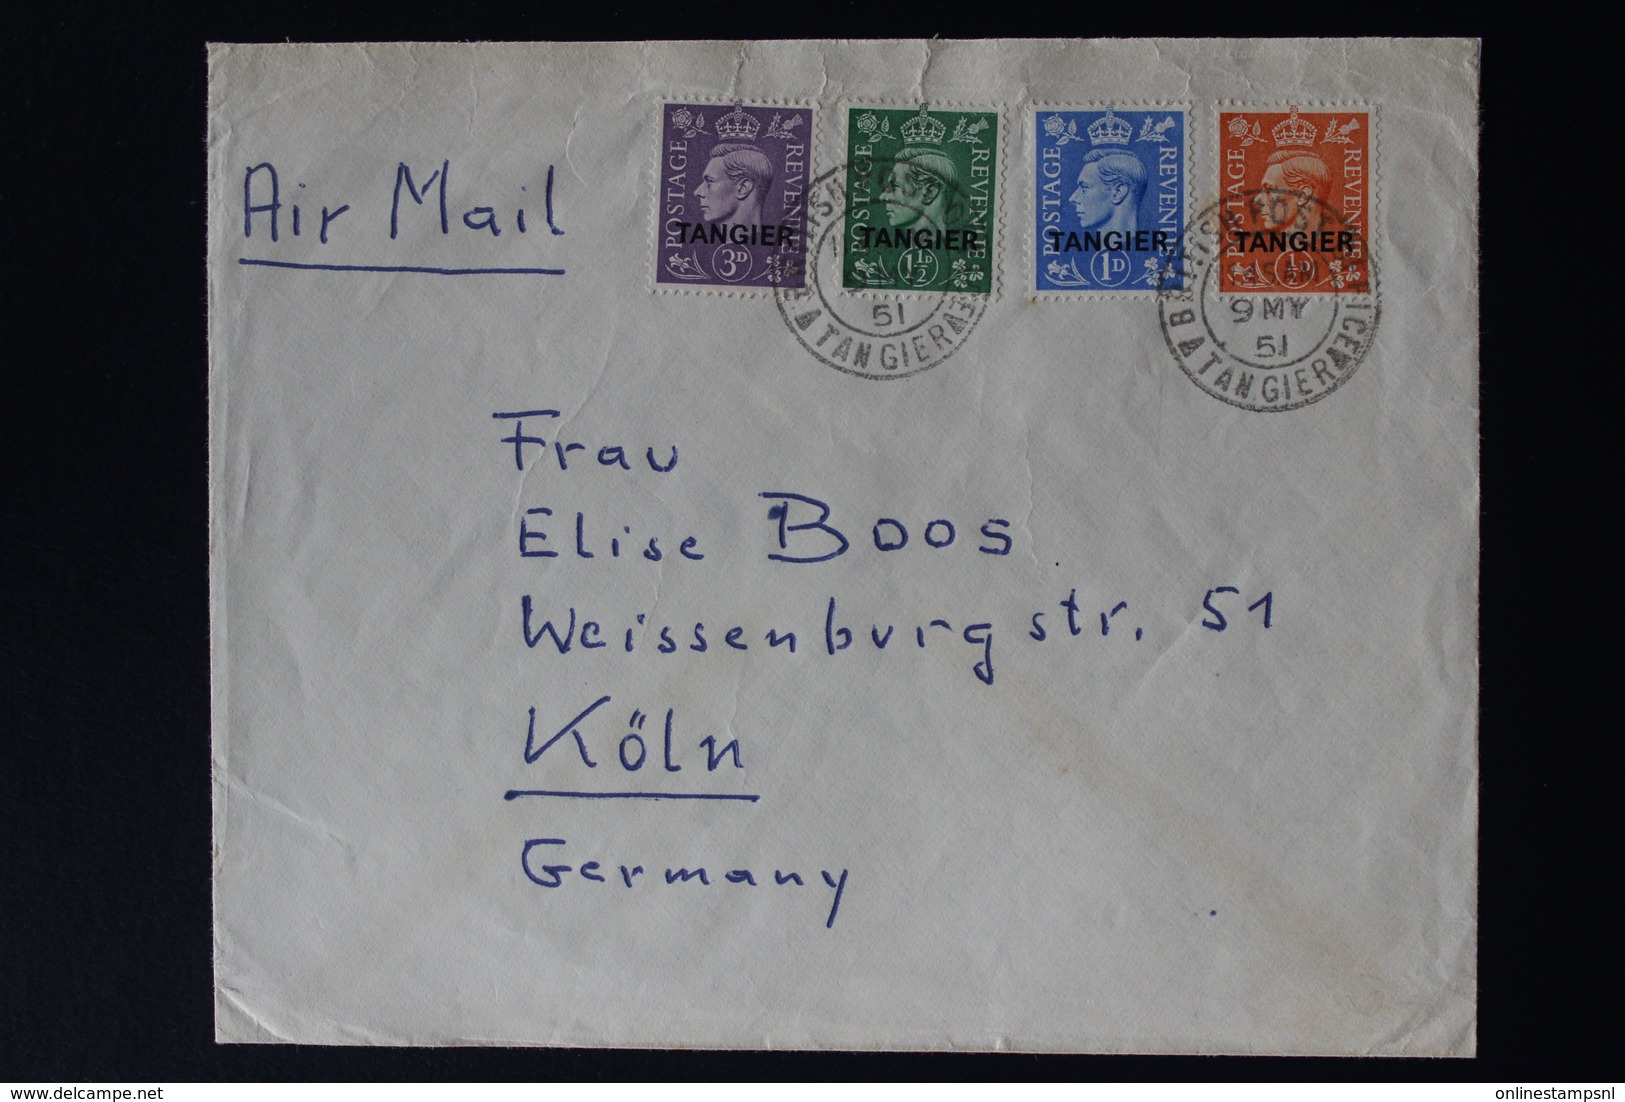 MOROCCO AGENCIES AIRMAIL COVER 9-5-1951 SG  263 - 280 - 281 - 282  TANGER TO COLN GERMANY 4 COLOR FRANKING - Morocco Agencies / Tangier (...-1958)